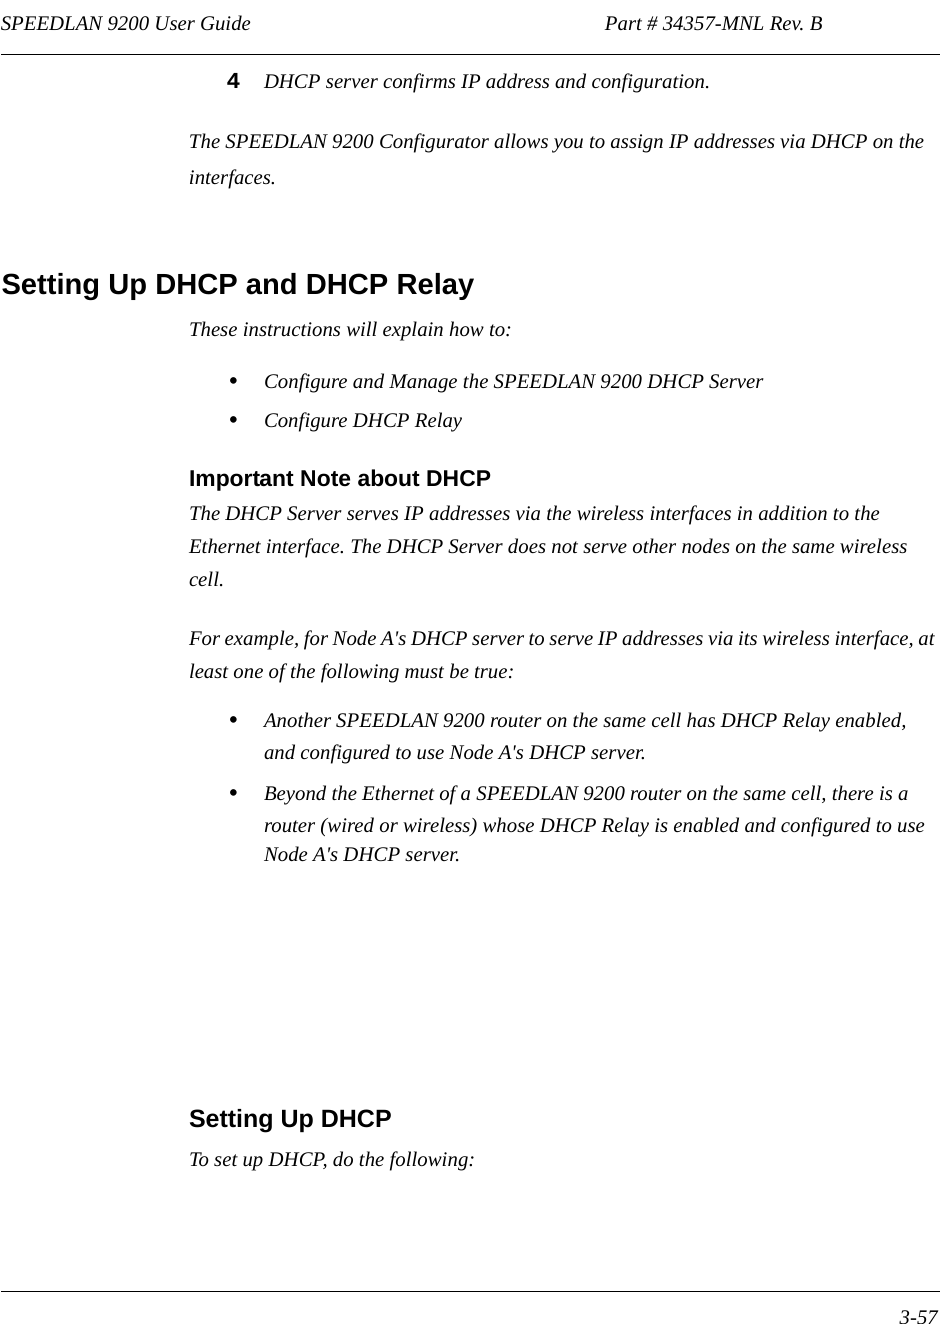 SPEEDLAN 9200 User Guide                                                                    Part # 34357-MNL Rev. B      3-57                                                                                                                                                              4DHCP server confirms IP address and configuration. The SPEEDLAN 9200 Configurator allows you to assign IP addresses via DHCP on the interfaces. Setting Up DHCP and DHCP Relay These instructions will explain how to:•Configure and Manage the SPEEDLAN 9200 DHCP Server•Configure DHCP RelayImportant Note about DHCPThe DHCP Server serves IP addresses via the wireless interfaces in addition to the Ethernet interface. The DHCP Server does not serve other nodes on the same wireless cell. For example, for Node A&apos;s DHCP server to serve IP addresses via its wireless interface, at least one of the following must be true:•Another SPEEDLAN 9200 router on the same cell has DHCP Relay enabled, and configured to use Node A&apos;s DHCP server.•Beyond the Ethernet of a SPEEDLAN 9200 router on the same cell, there is a router (wired or wireless) whose DHCP Relay is enabled and configured to use Node A&apos;s DHCP server.Setting Up DHCP To set up DHCP, do the following: